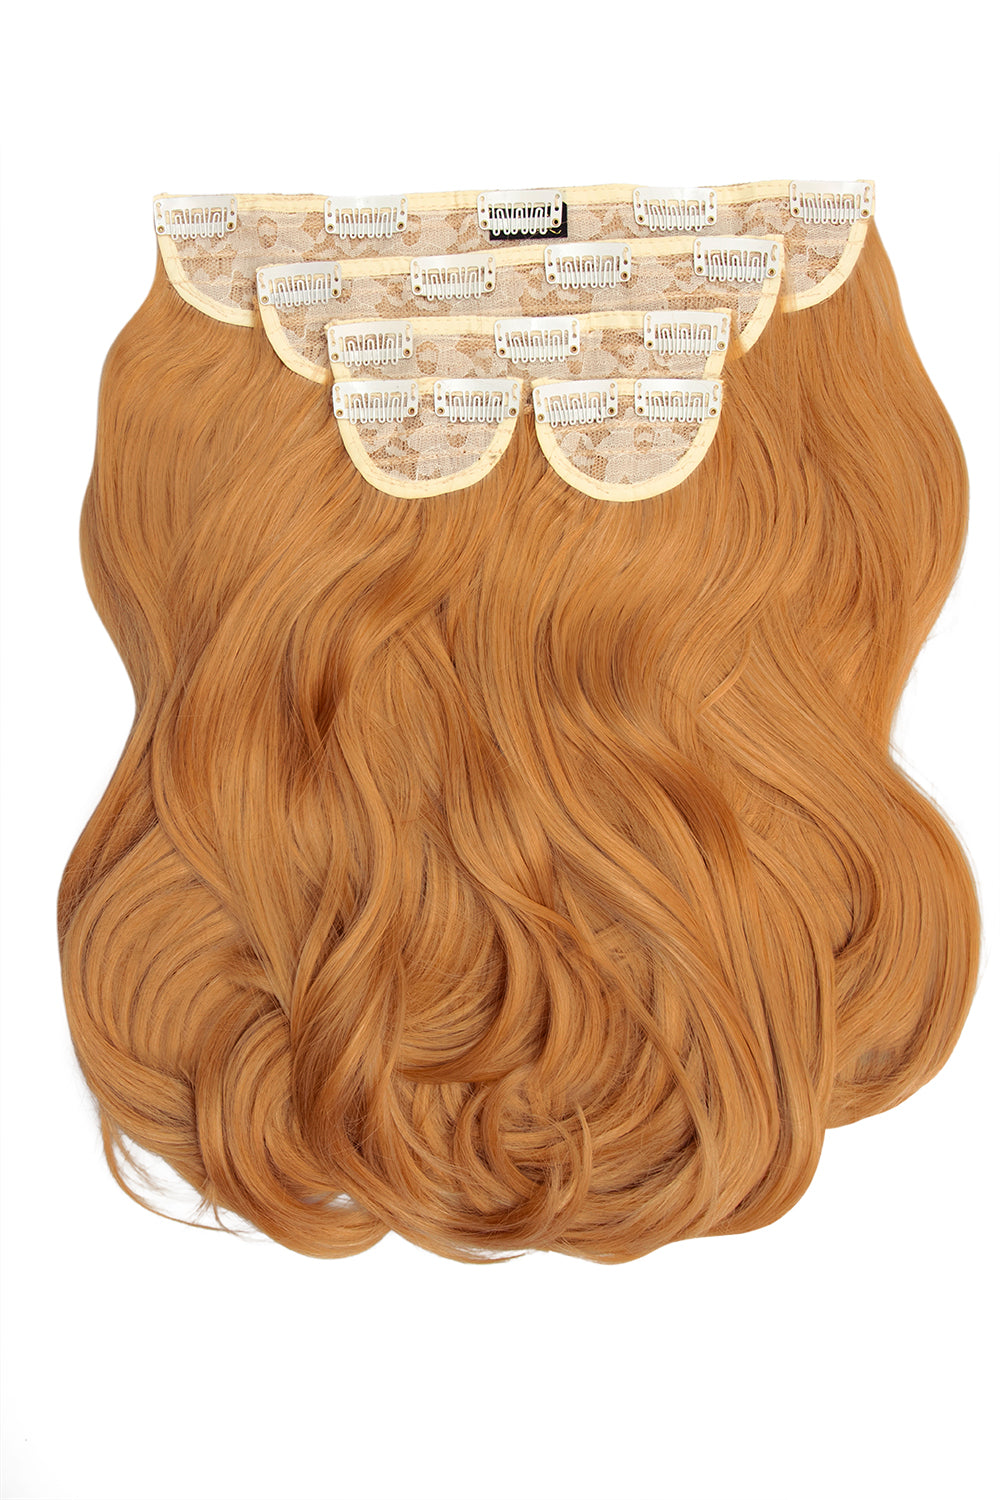 Super Thick 16" 5 Piece Blow Dry Wavy Clip In Hair Extensions - Strawberry Blonde